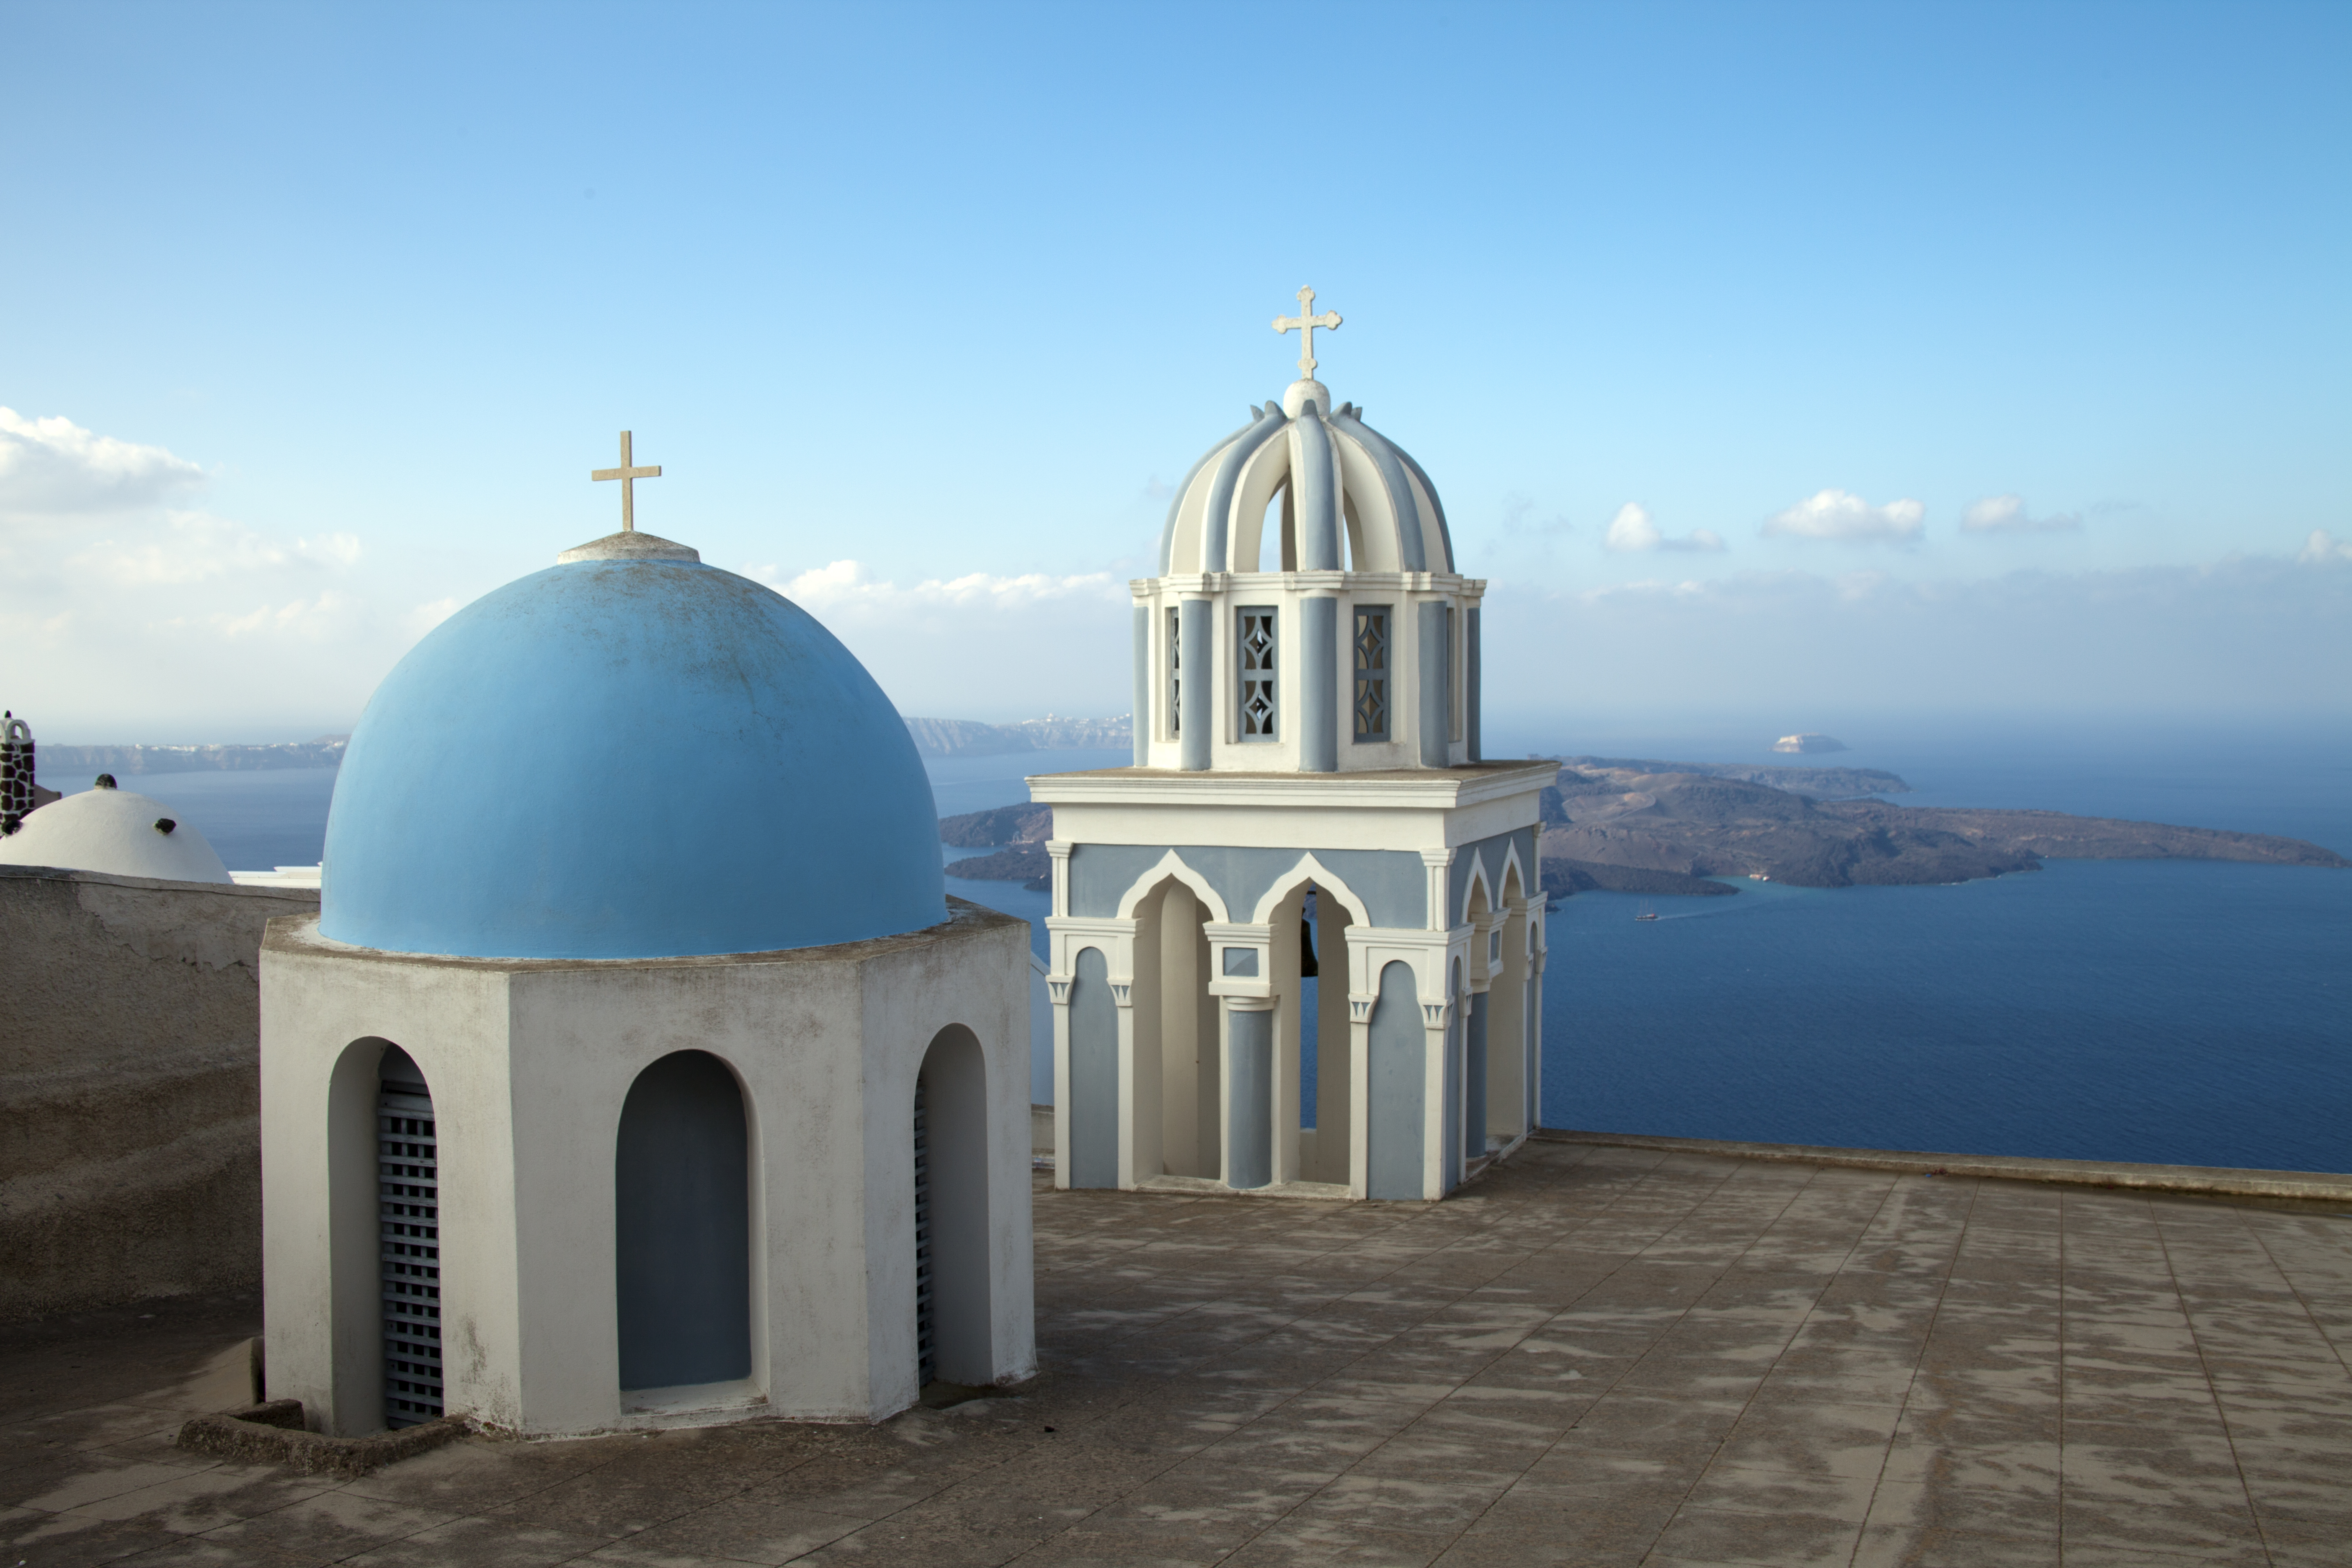 Blue domed churches in Santorini Greece near the town of Fira - architecture